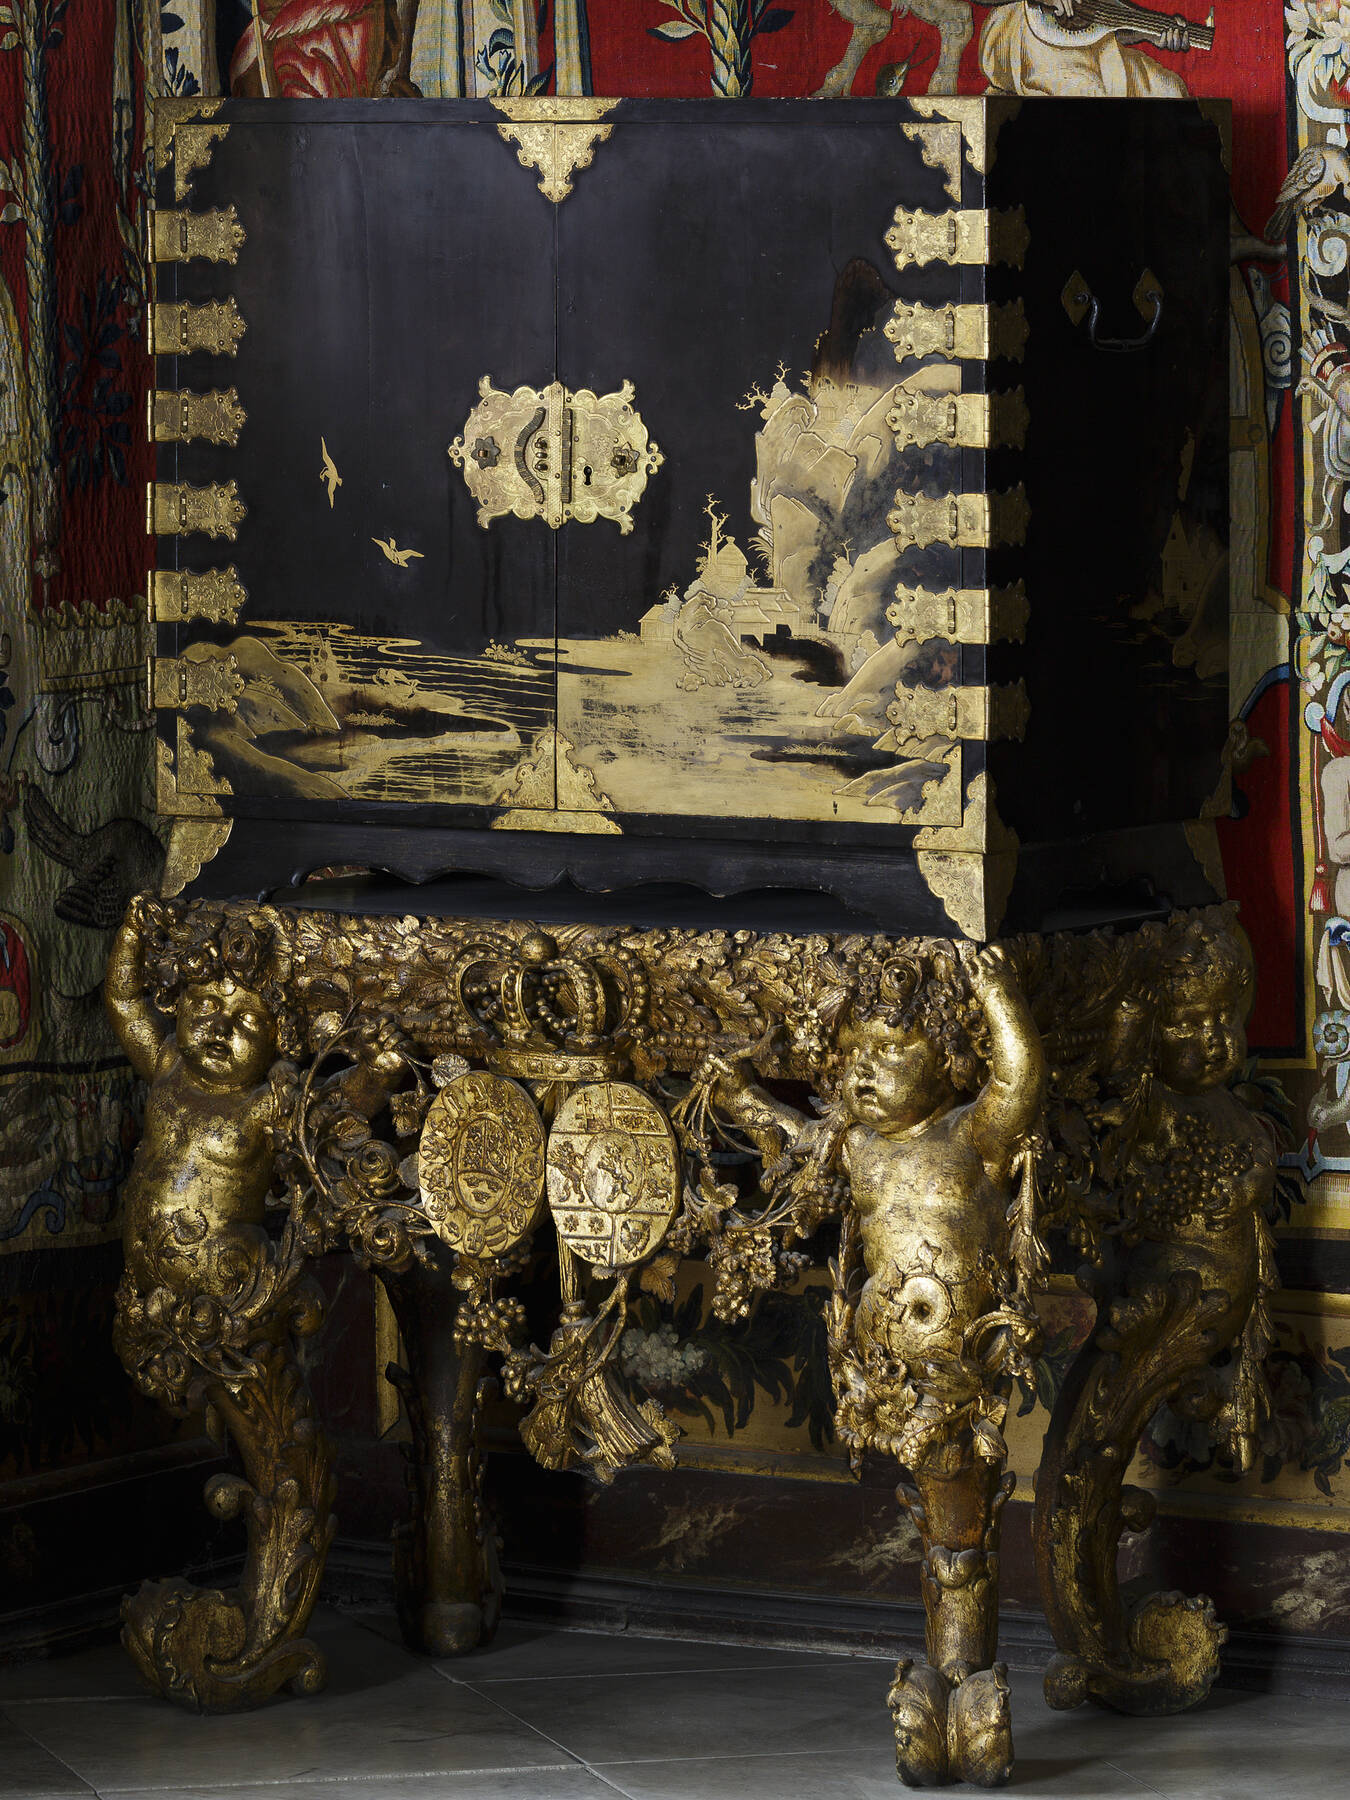 a three-quarter view of an incredibly elaborate Japanese cabinet, featuring a gold lacquer landscape scene with rocky outcroppings, flying birds, pagodas, and a body of water